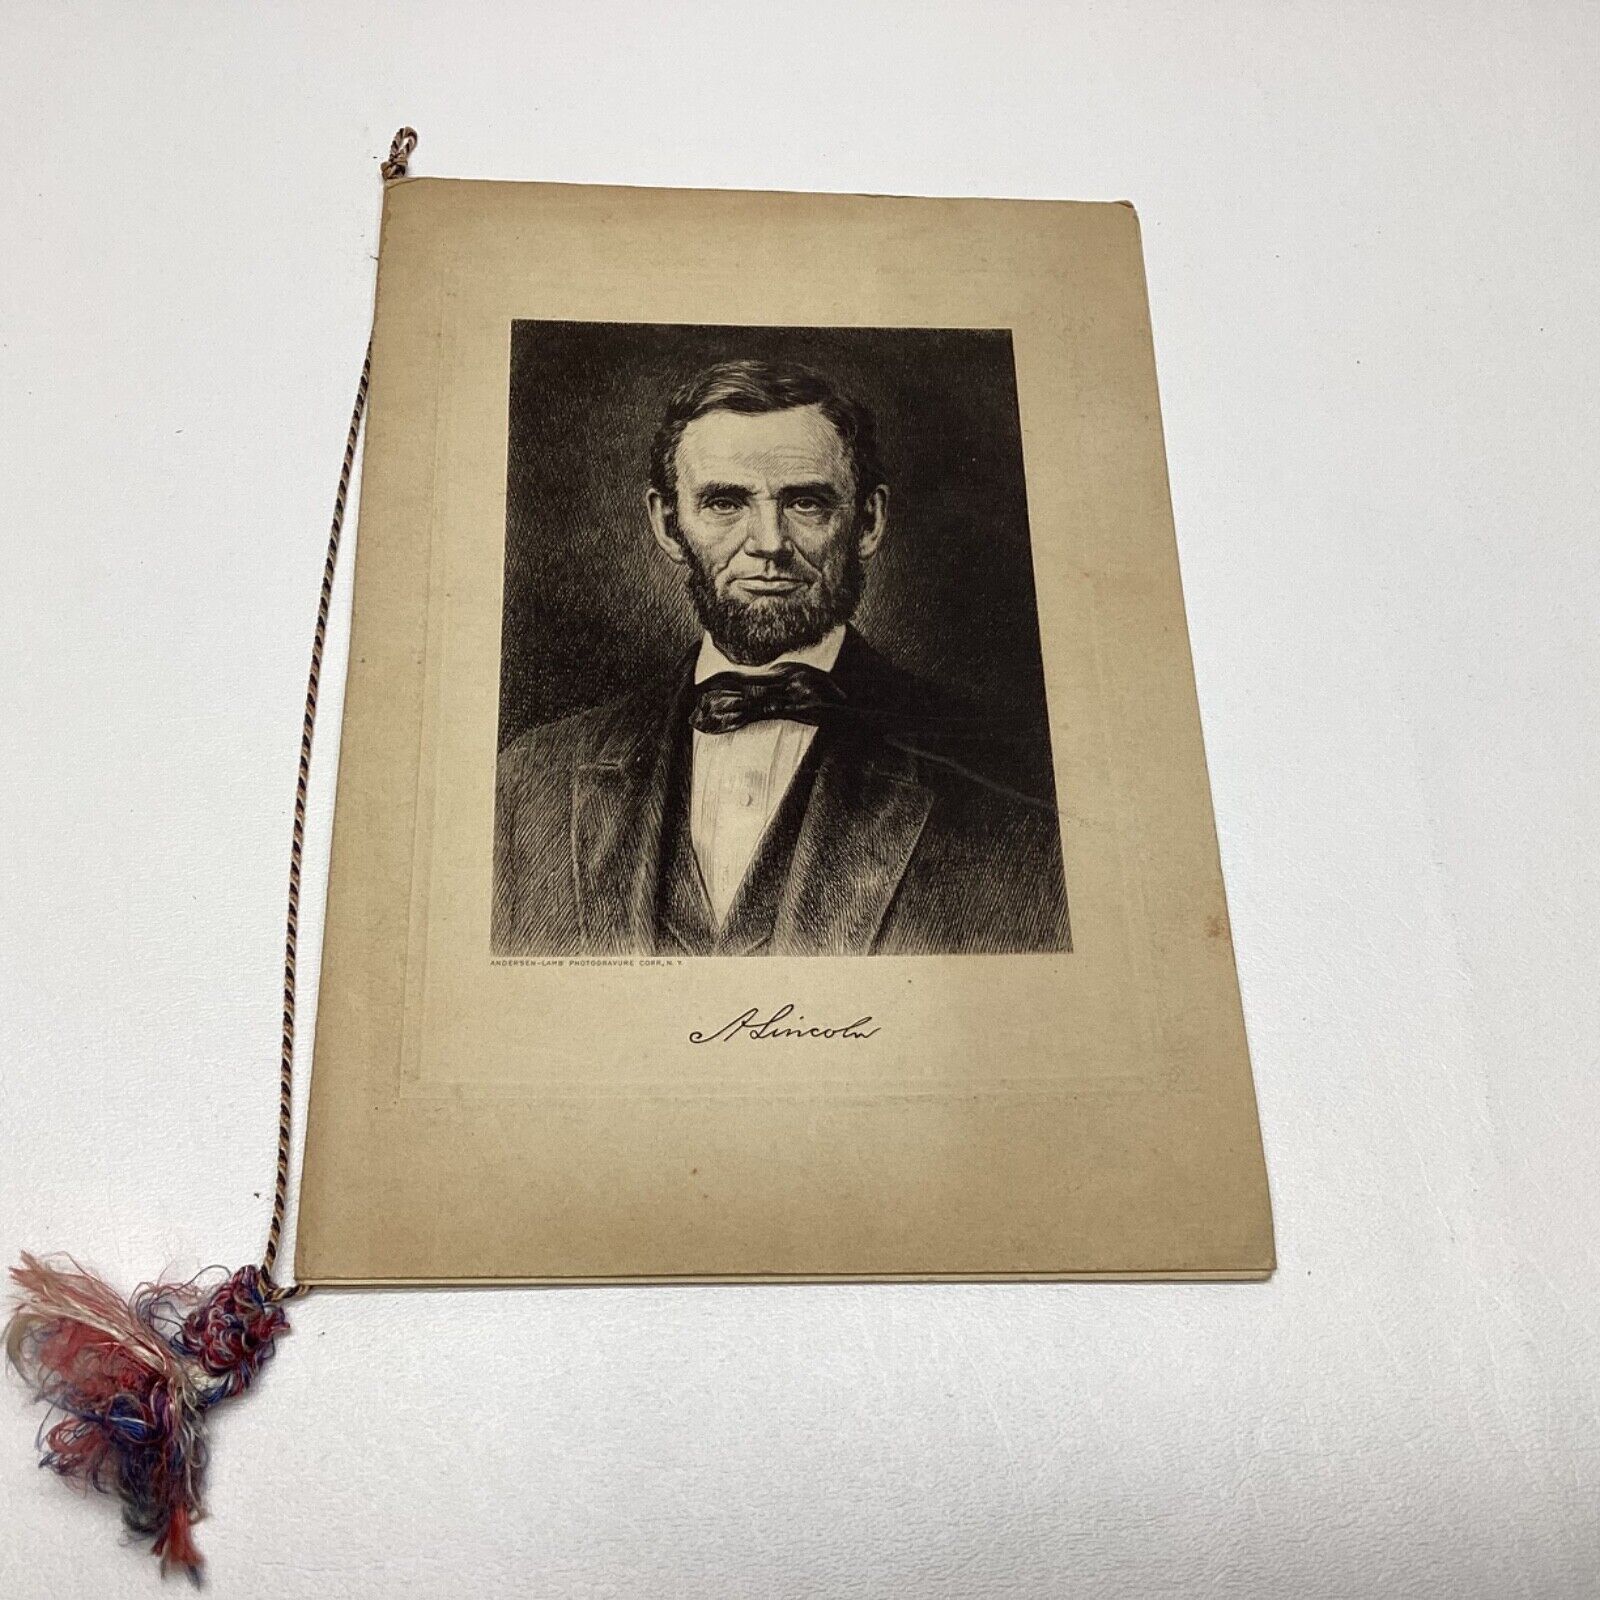 RARE Dinner to Celebrate Lincoln’s Birthday on S. S. Rotterdam 2-11-1928 (OFFER)